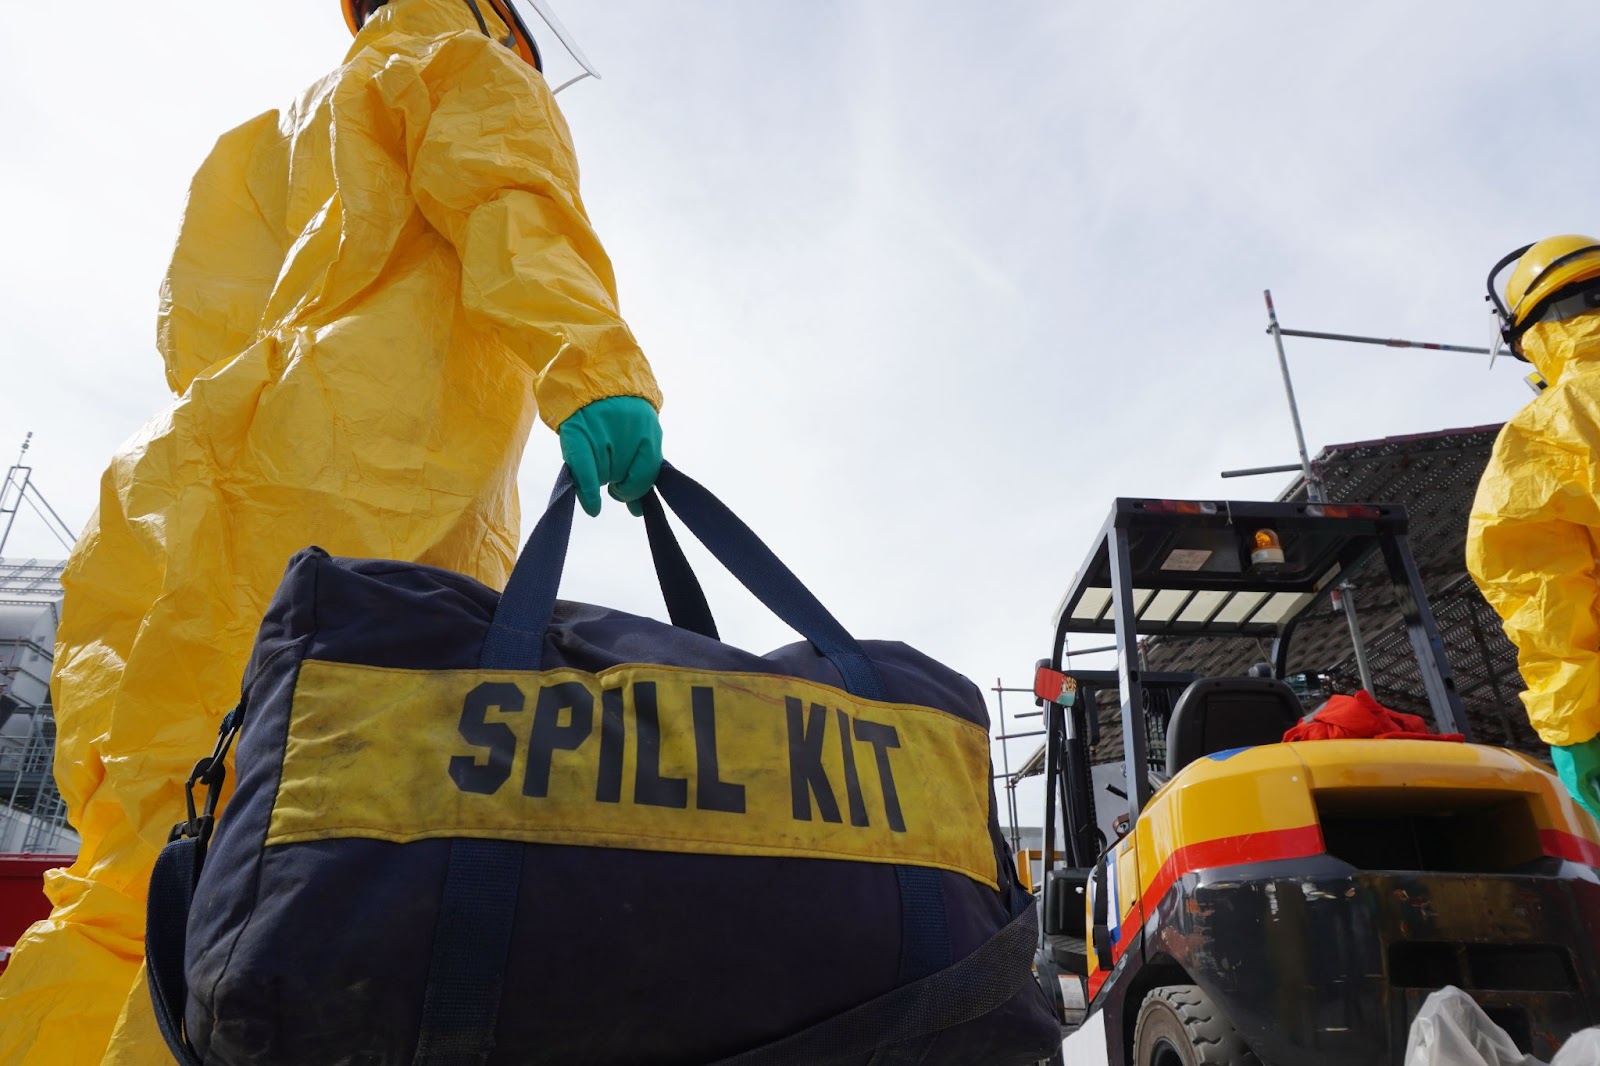 CBRN Training Tools: How to Compare the Latest Technology